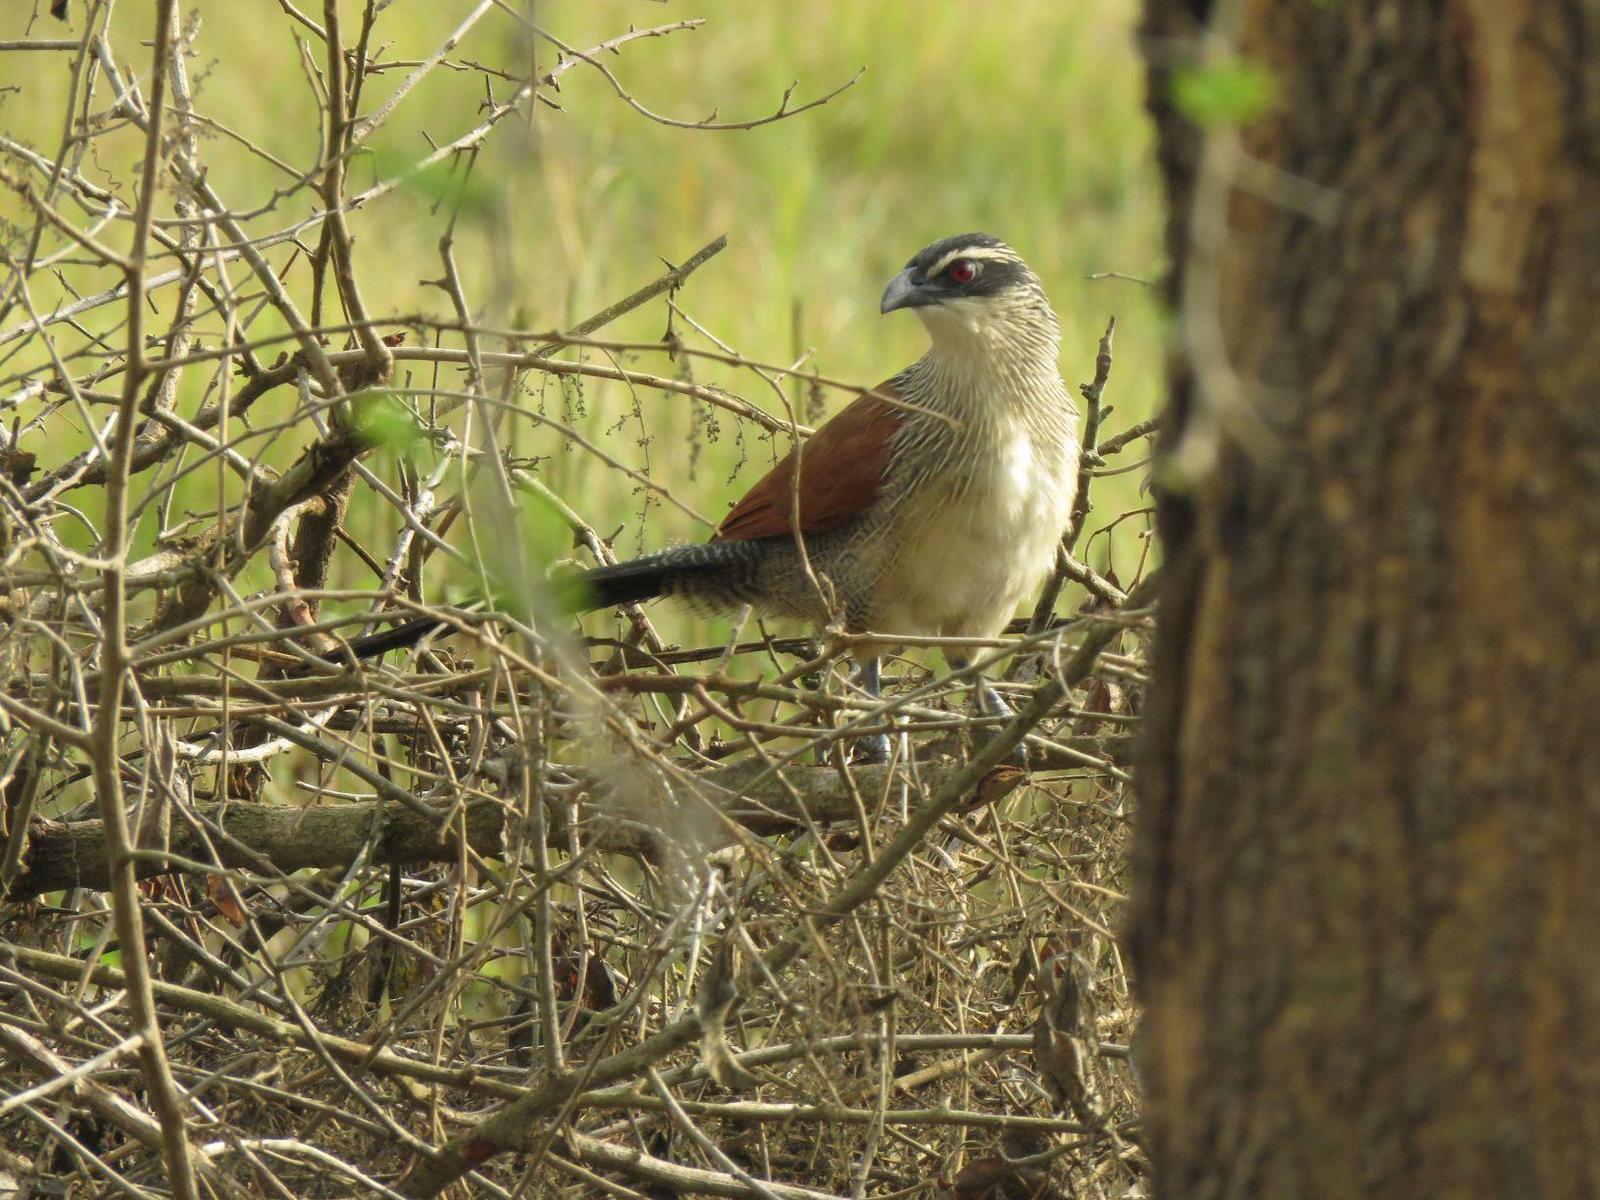 White-browed Coucal Photo by Cyndee Pelt